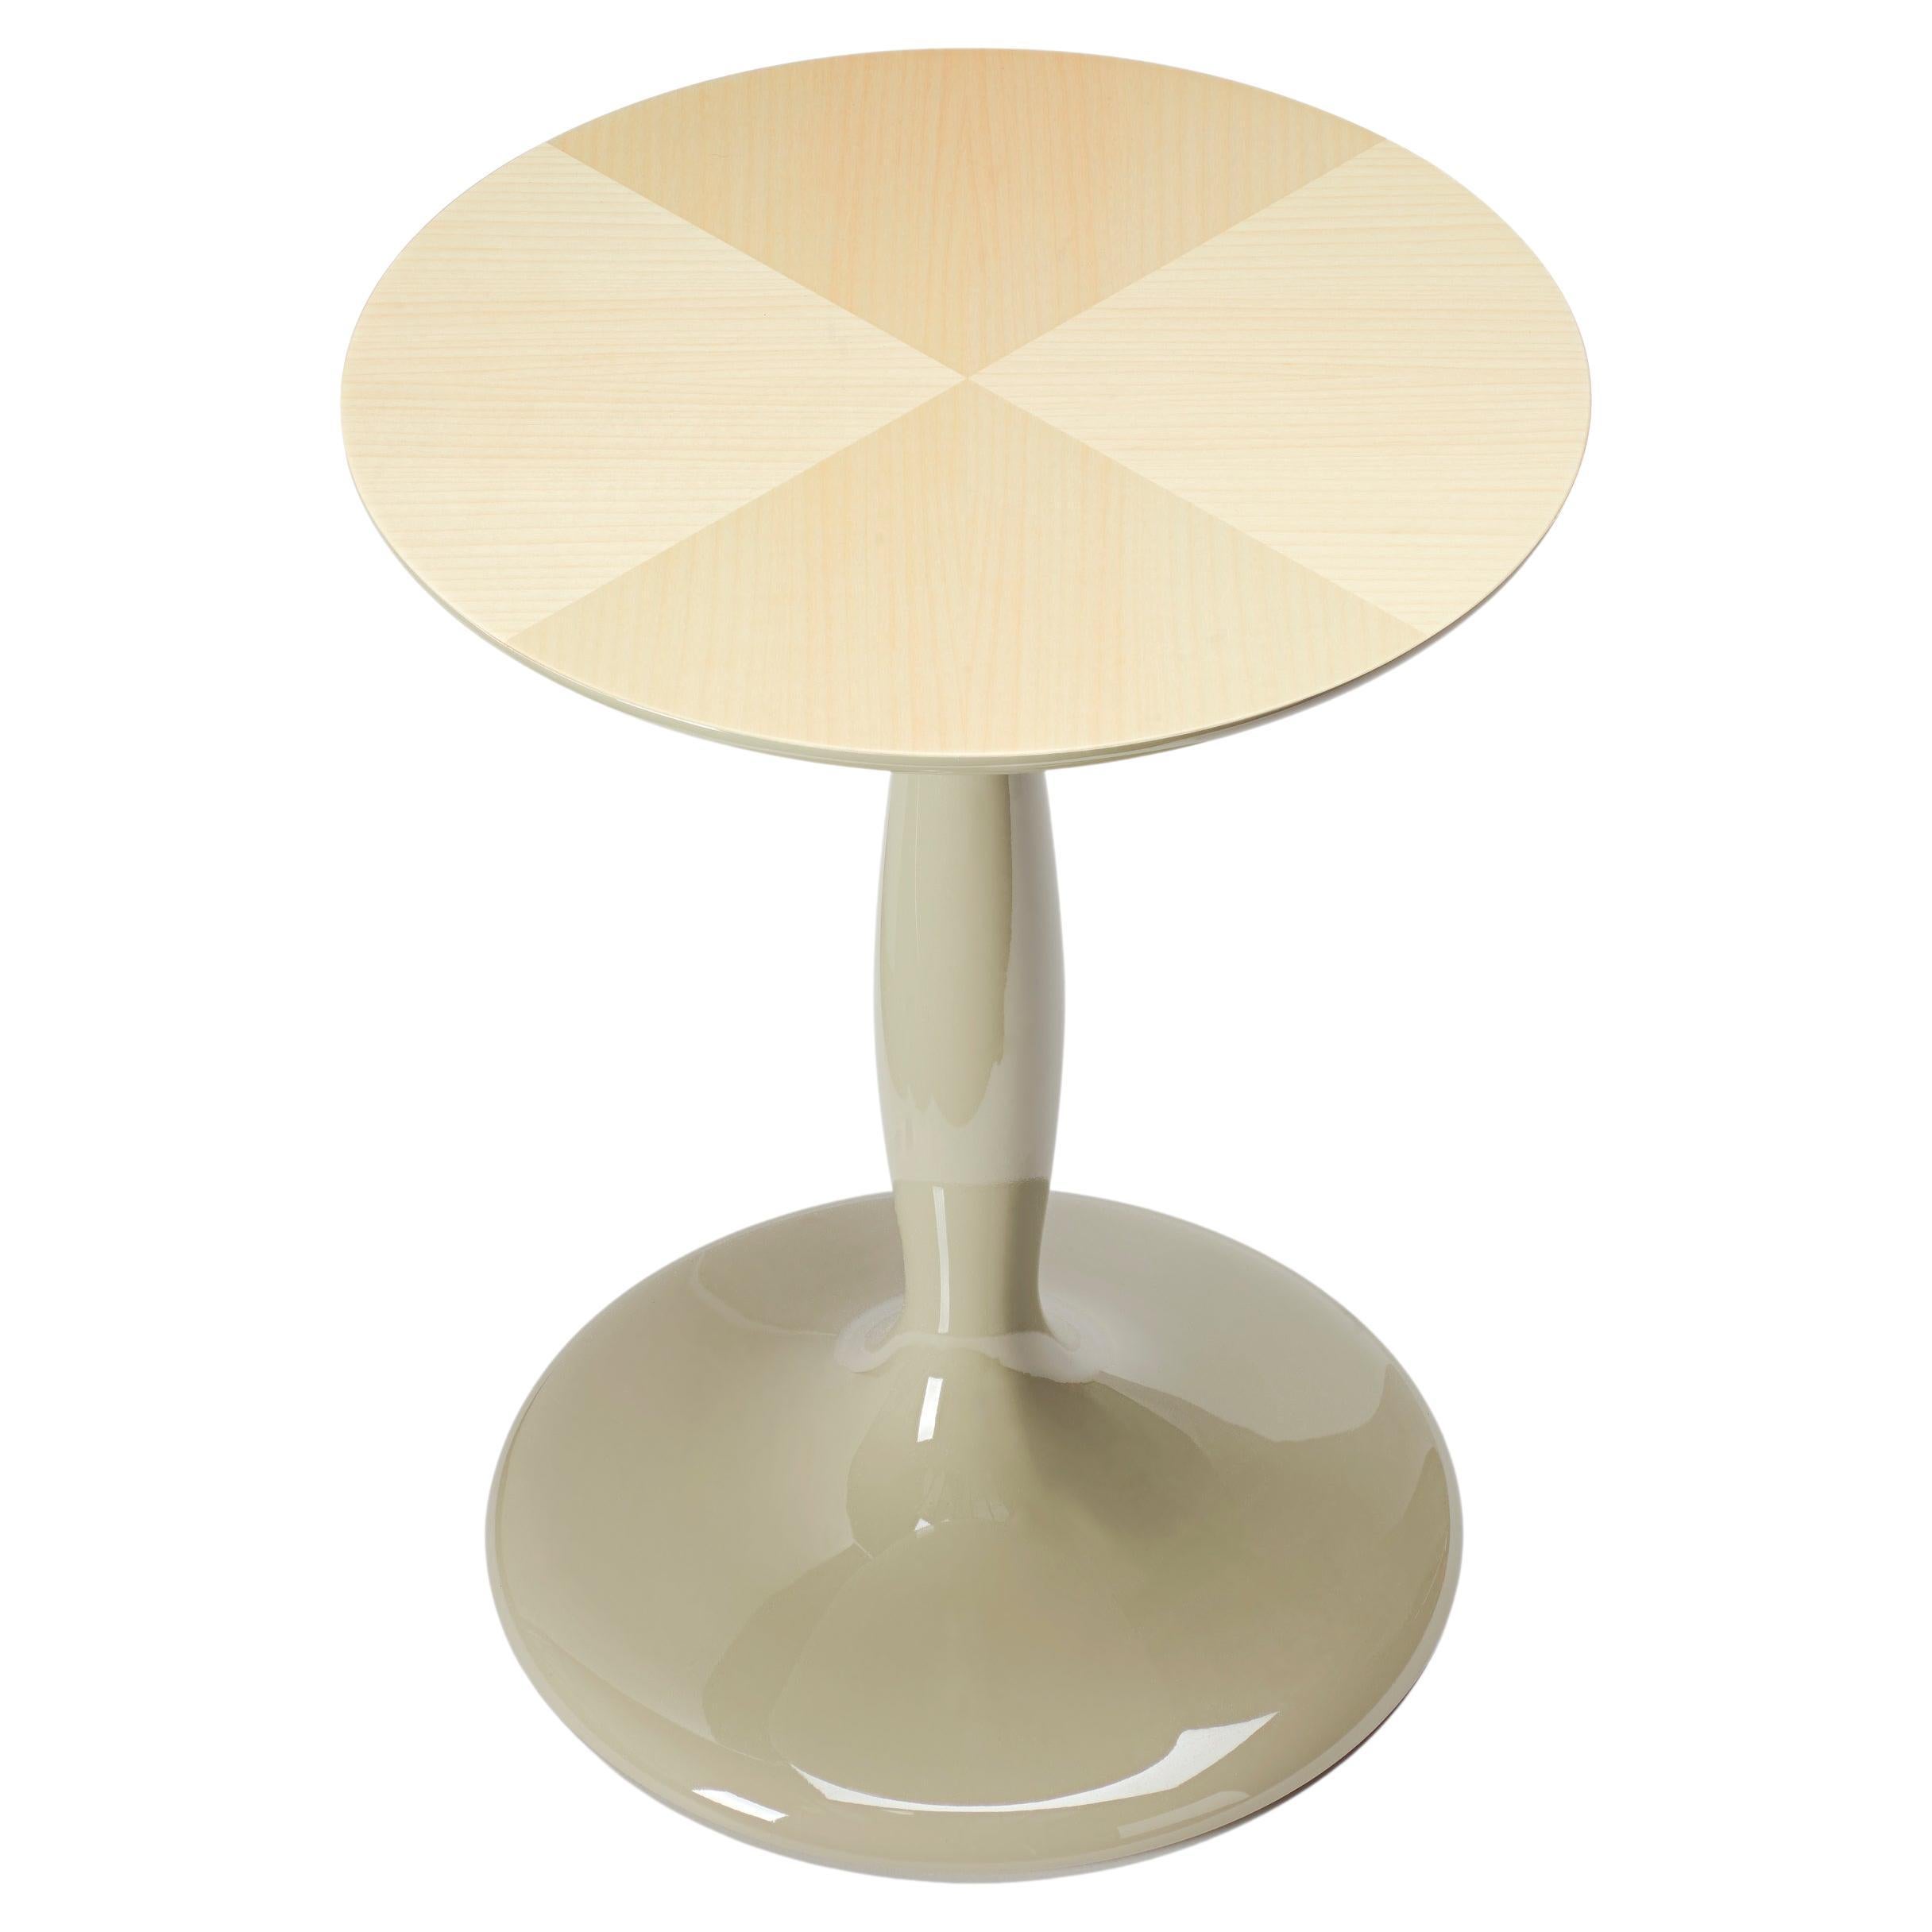 Contemporary High Gloss Lacquered Side Table "Parigi" by Studio Catoir For Sale